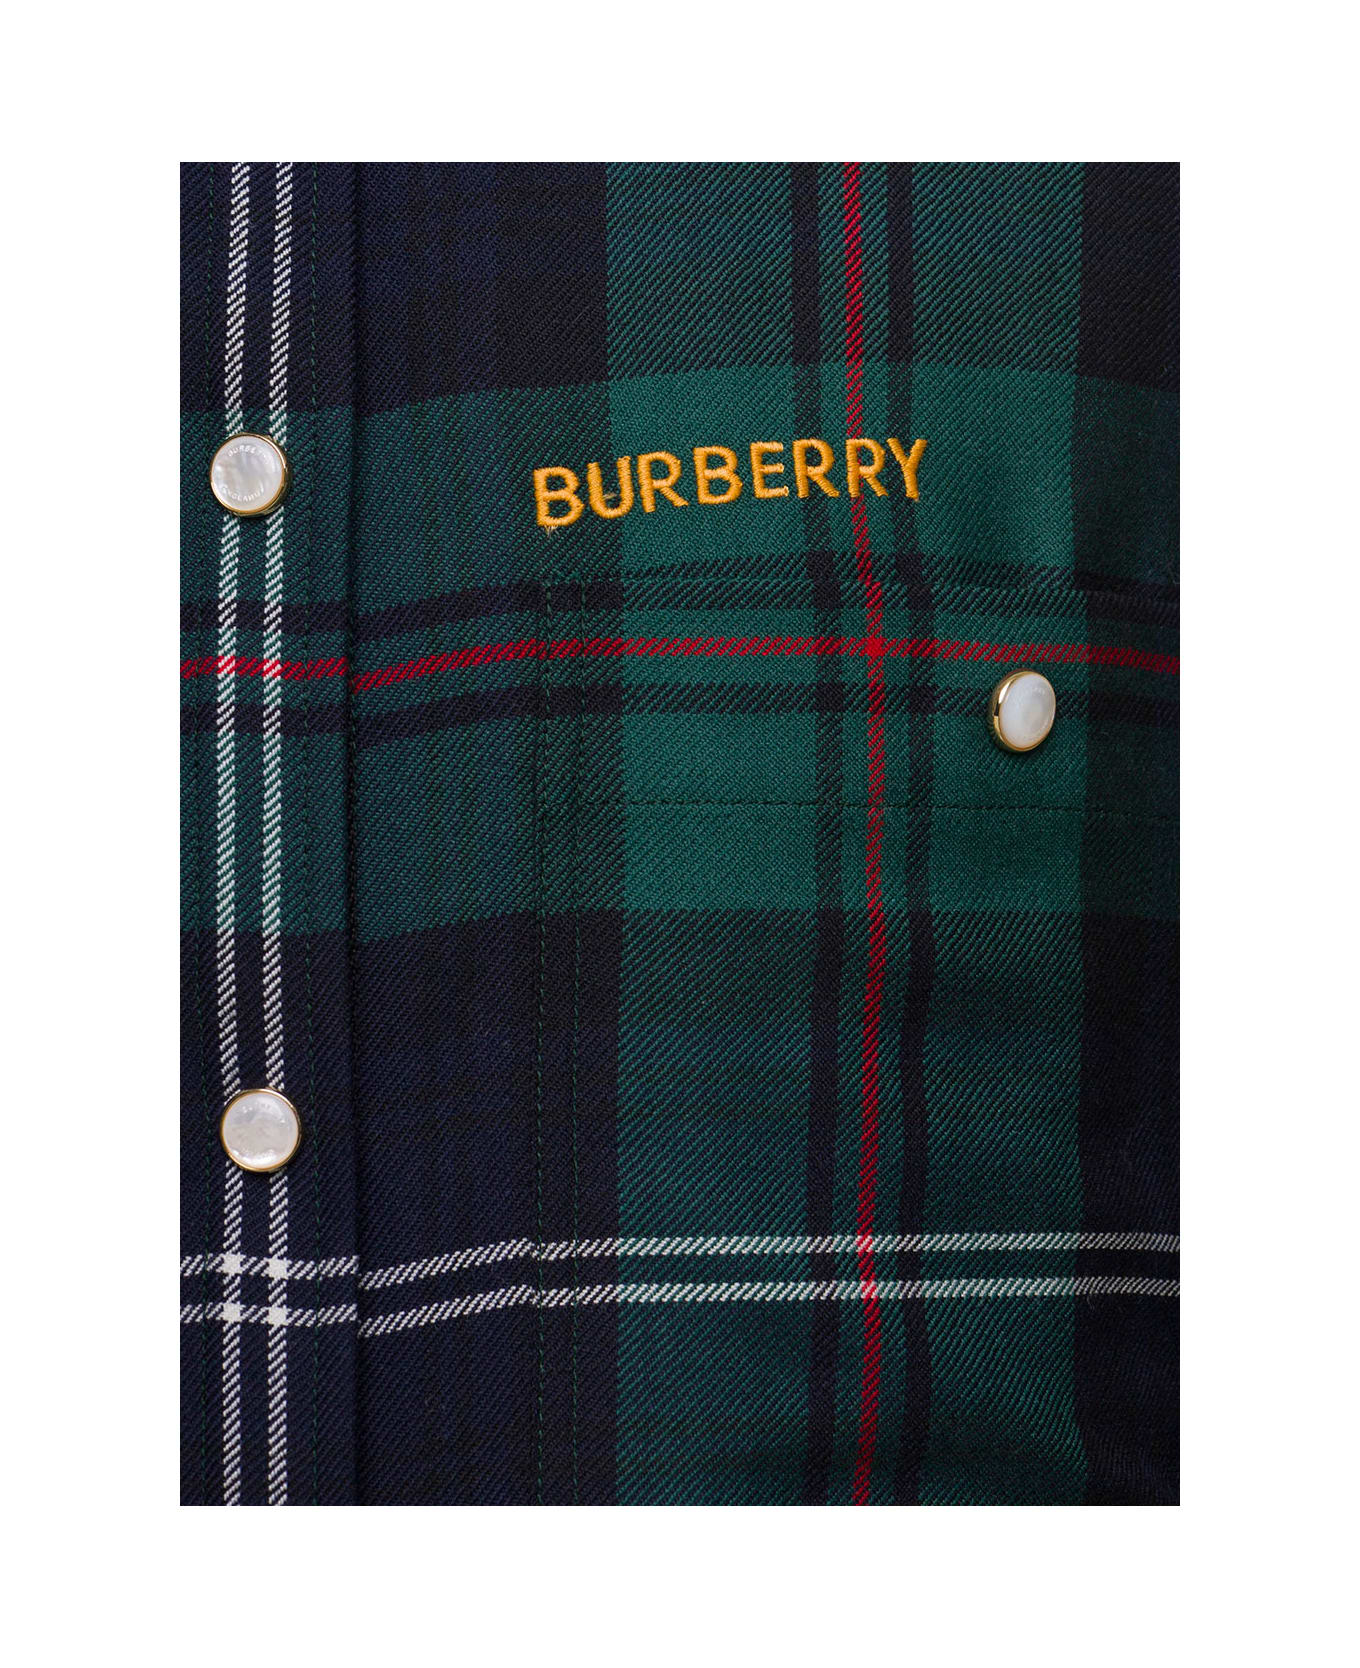 Burberry W Woven Tops - Green